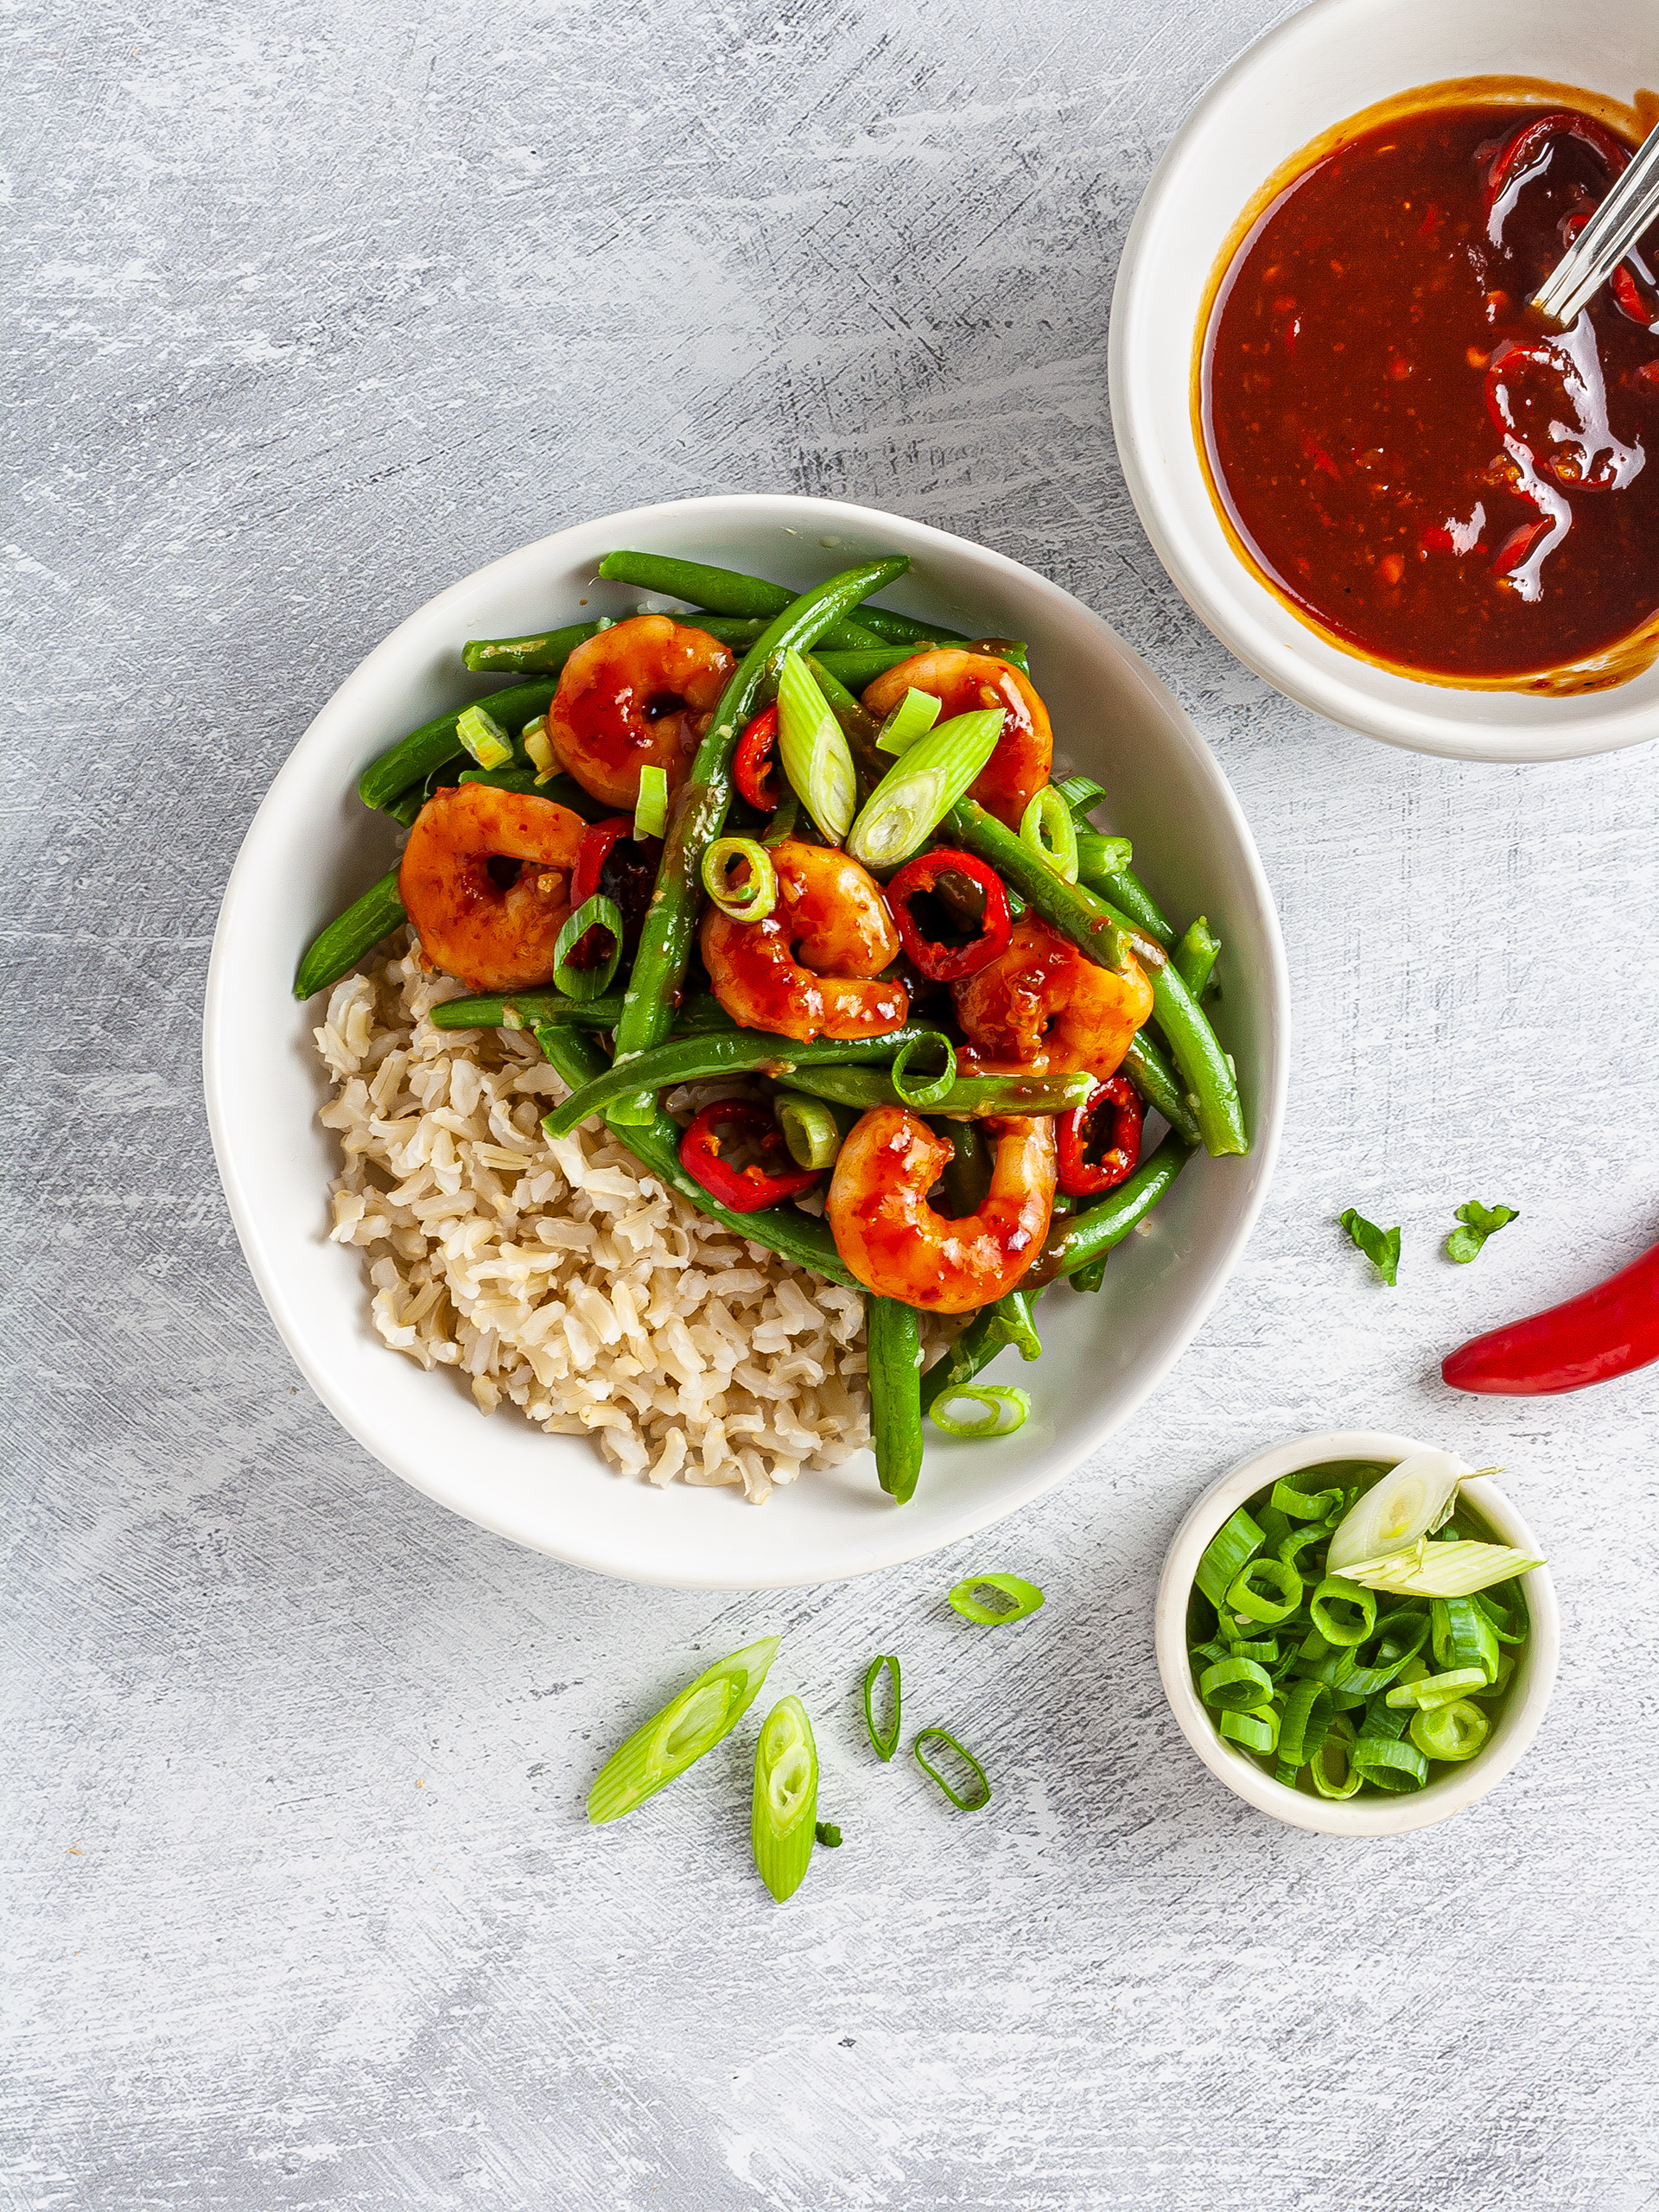 Sweet chili prawns bowl with brown rice, green beans, and spring onions